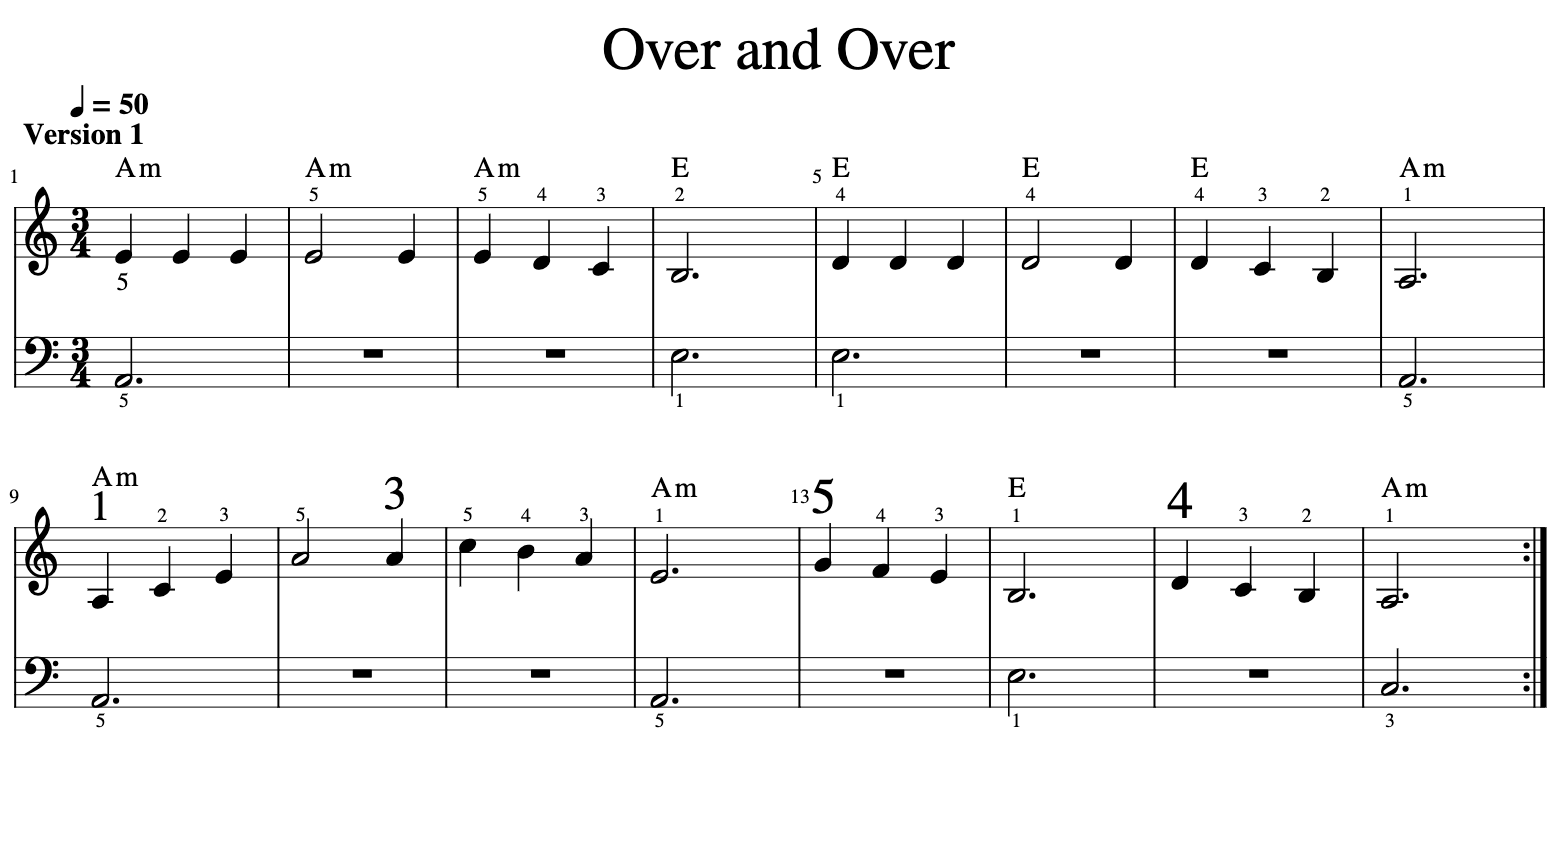 Over and over - Sheet Music